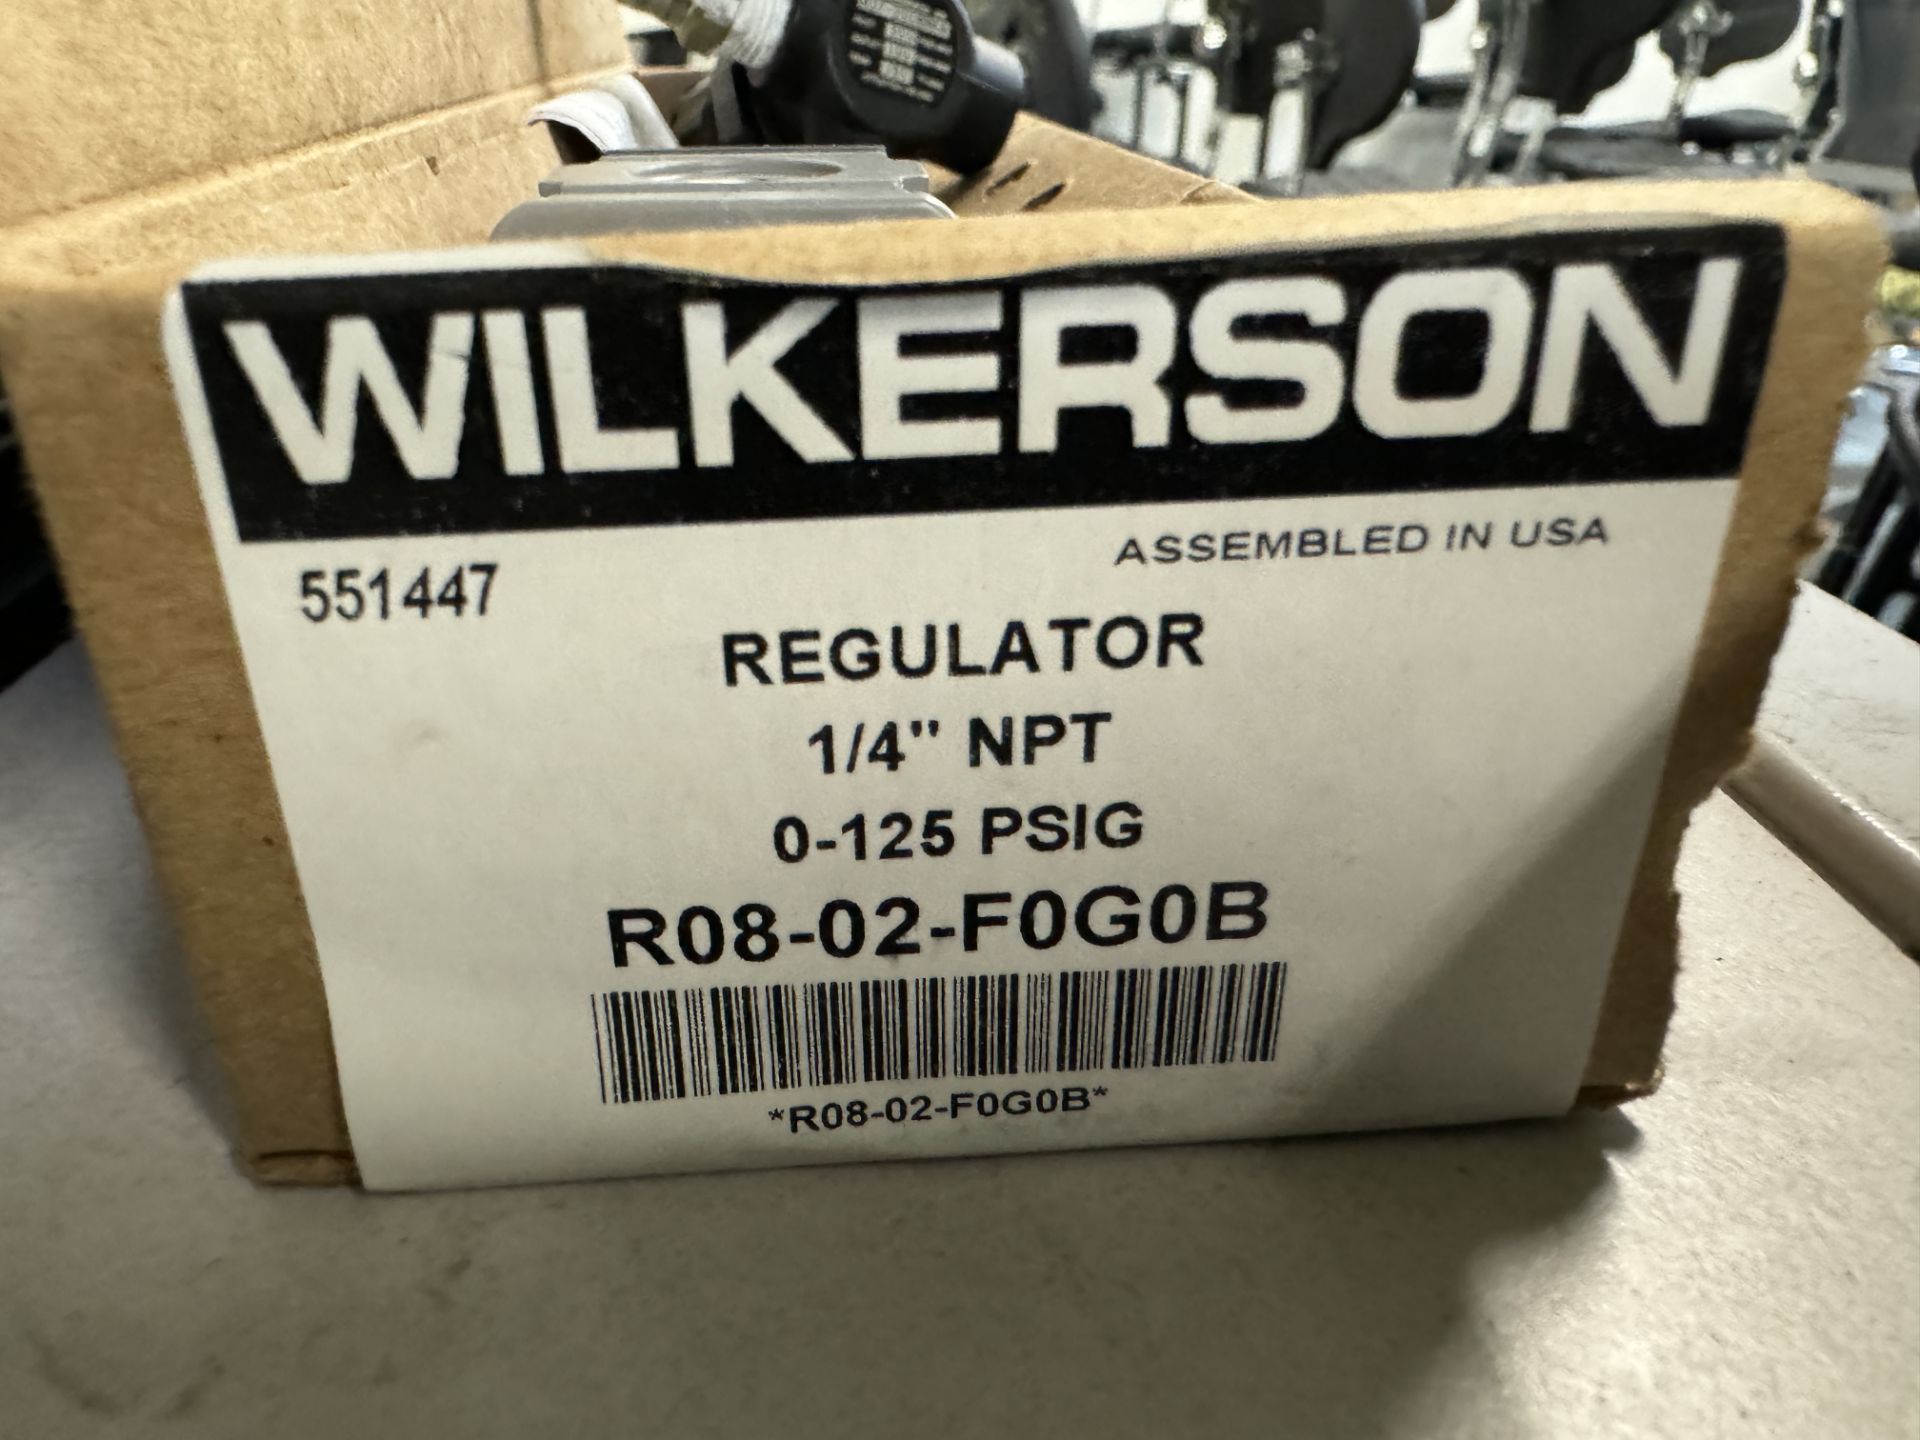 TOTE WITH ASSORTED PNEUMATIC HOSE AND WILKERSON 1/4" NPT REGULATOR - Image 5 of 5